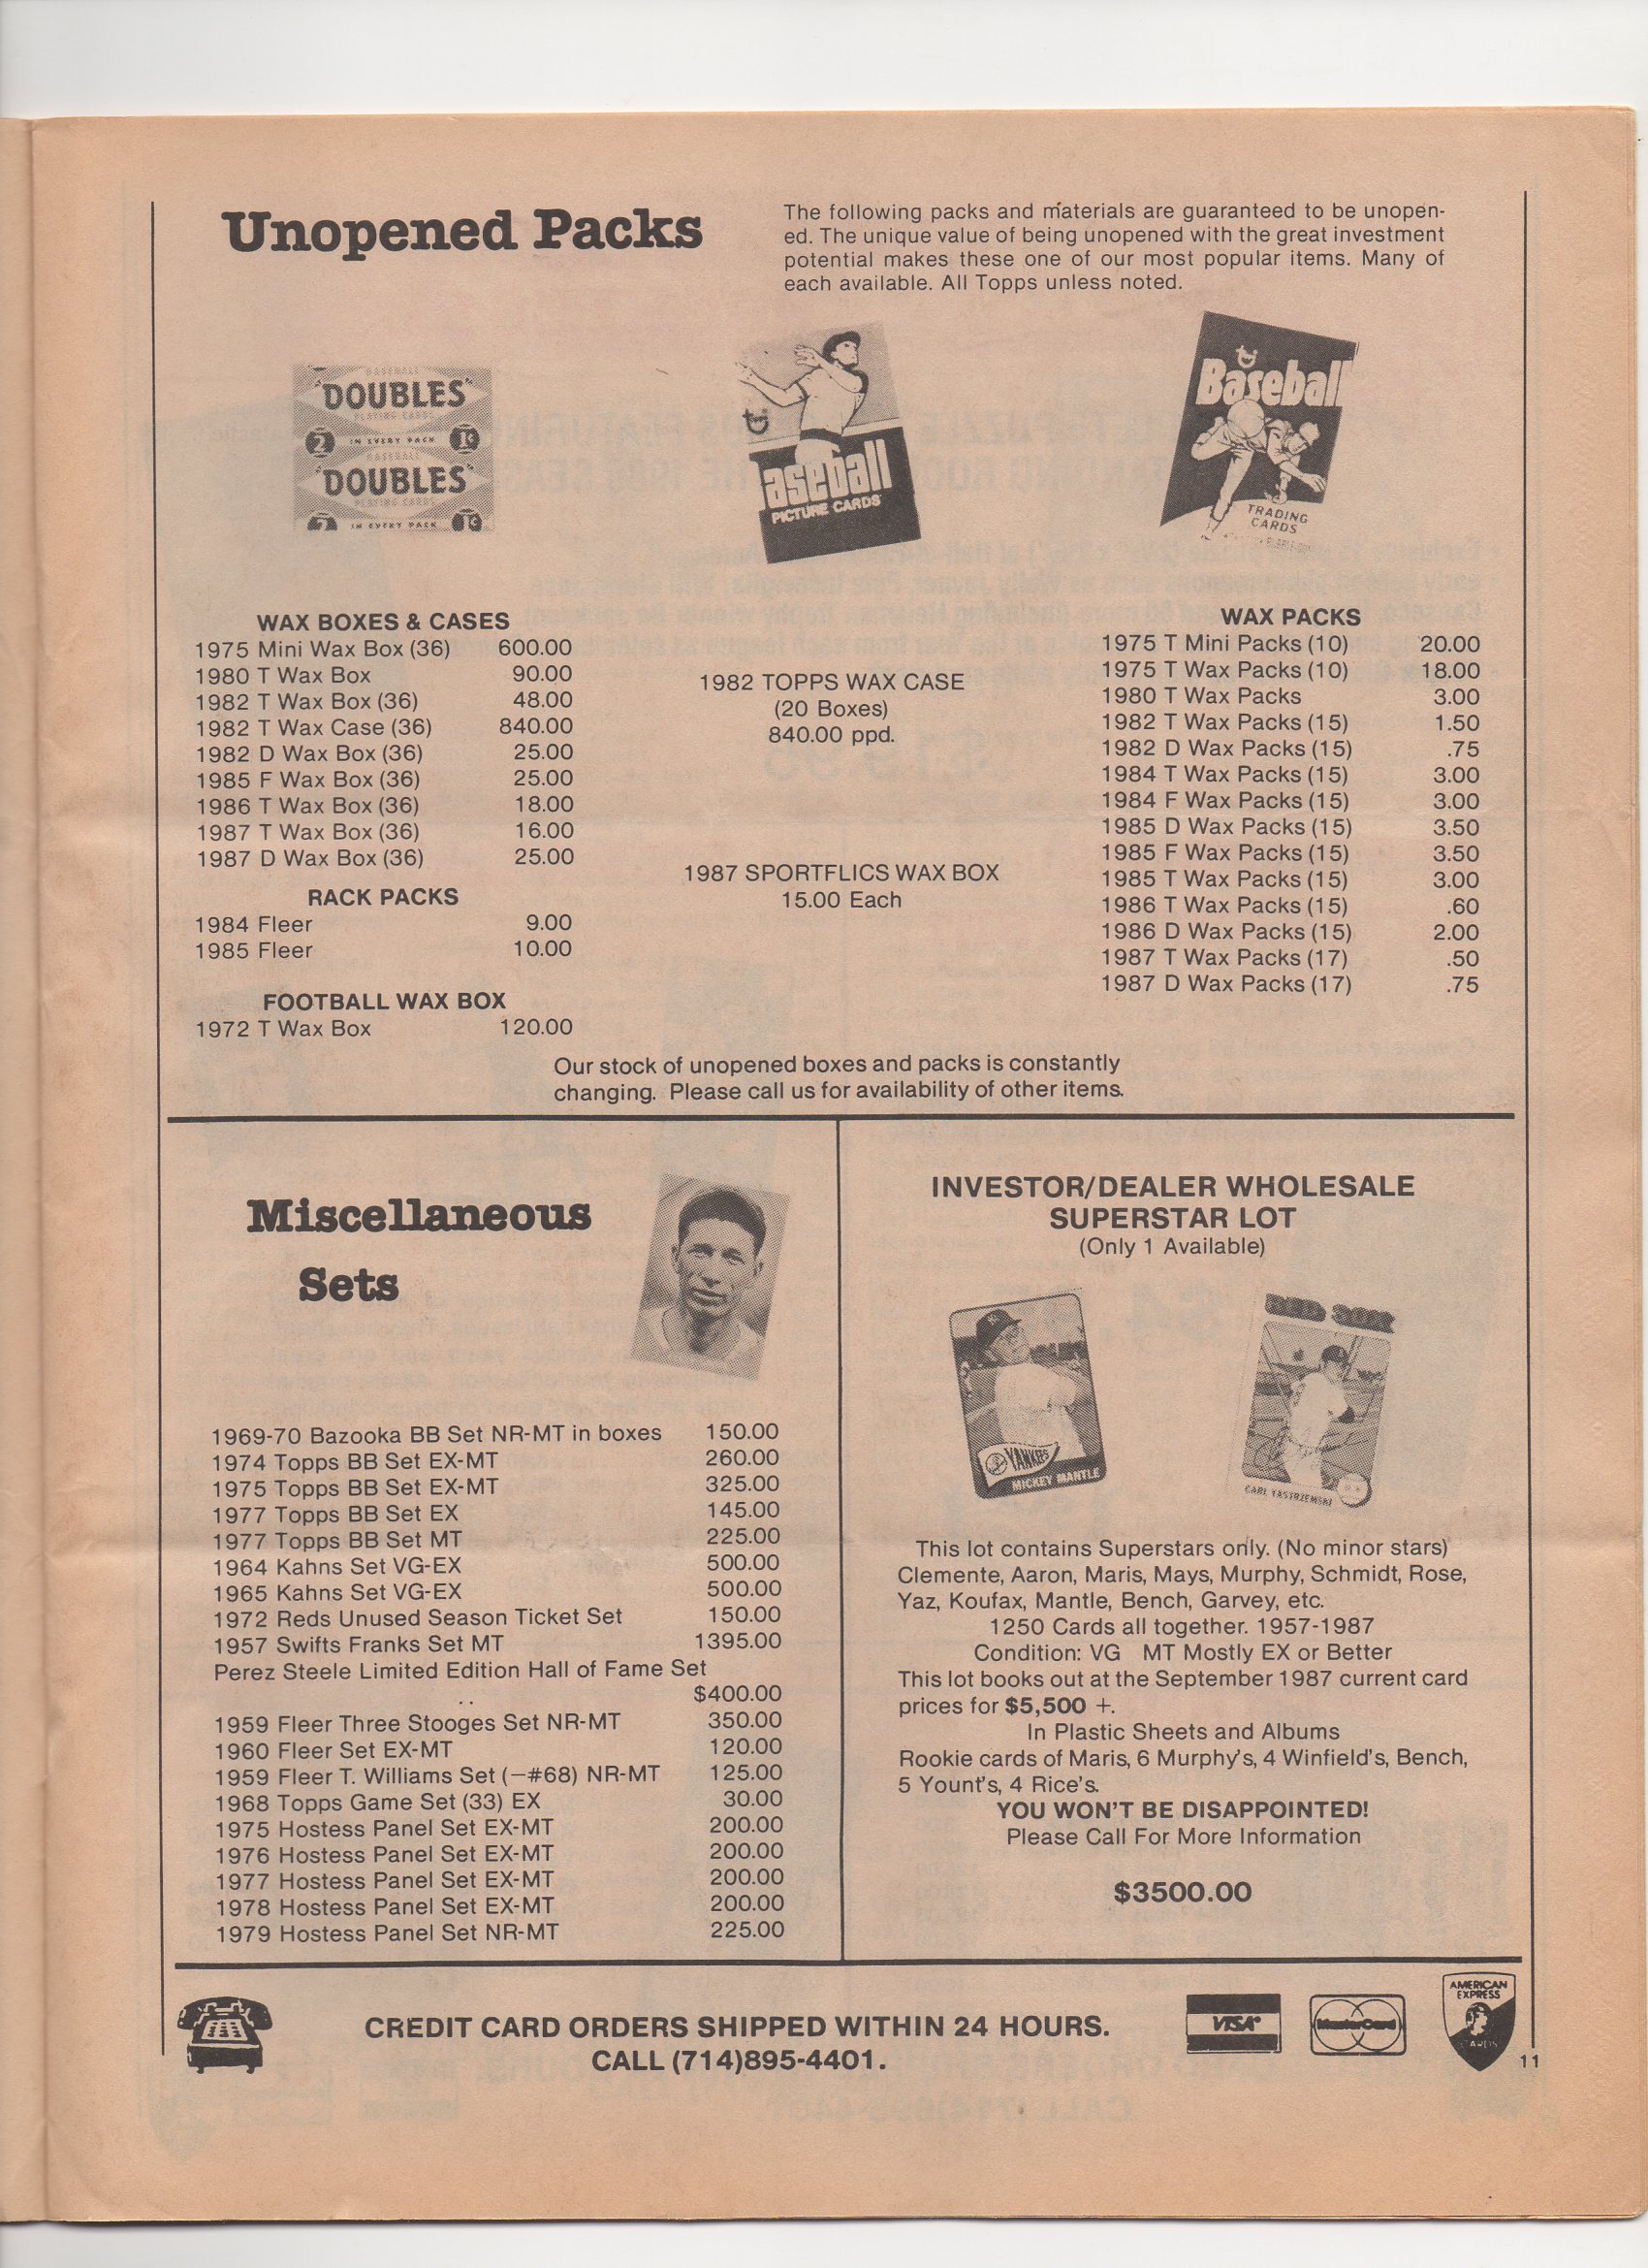 1988 sports card plus, winter/spring revised catalog